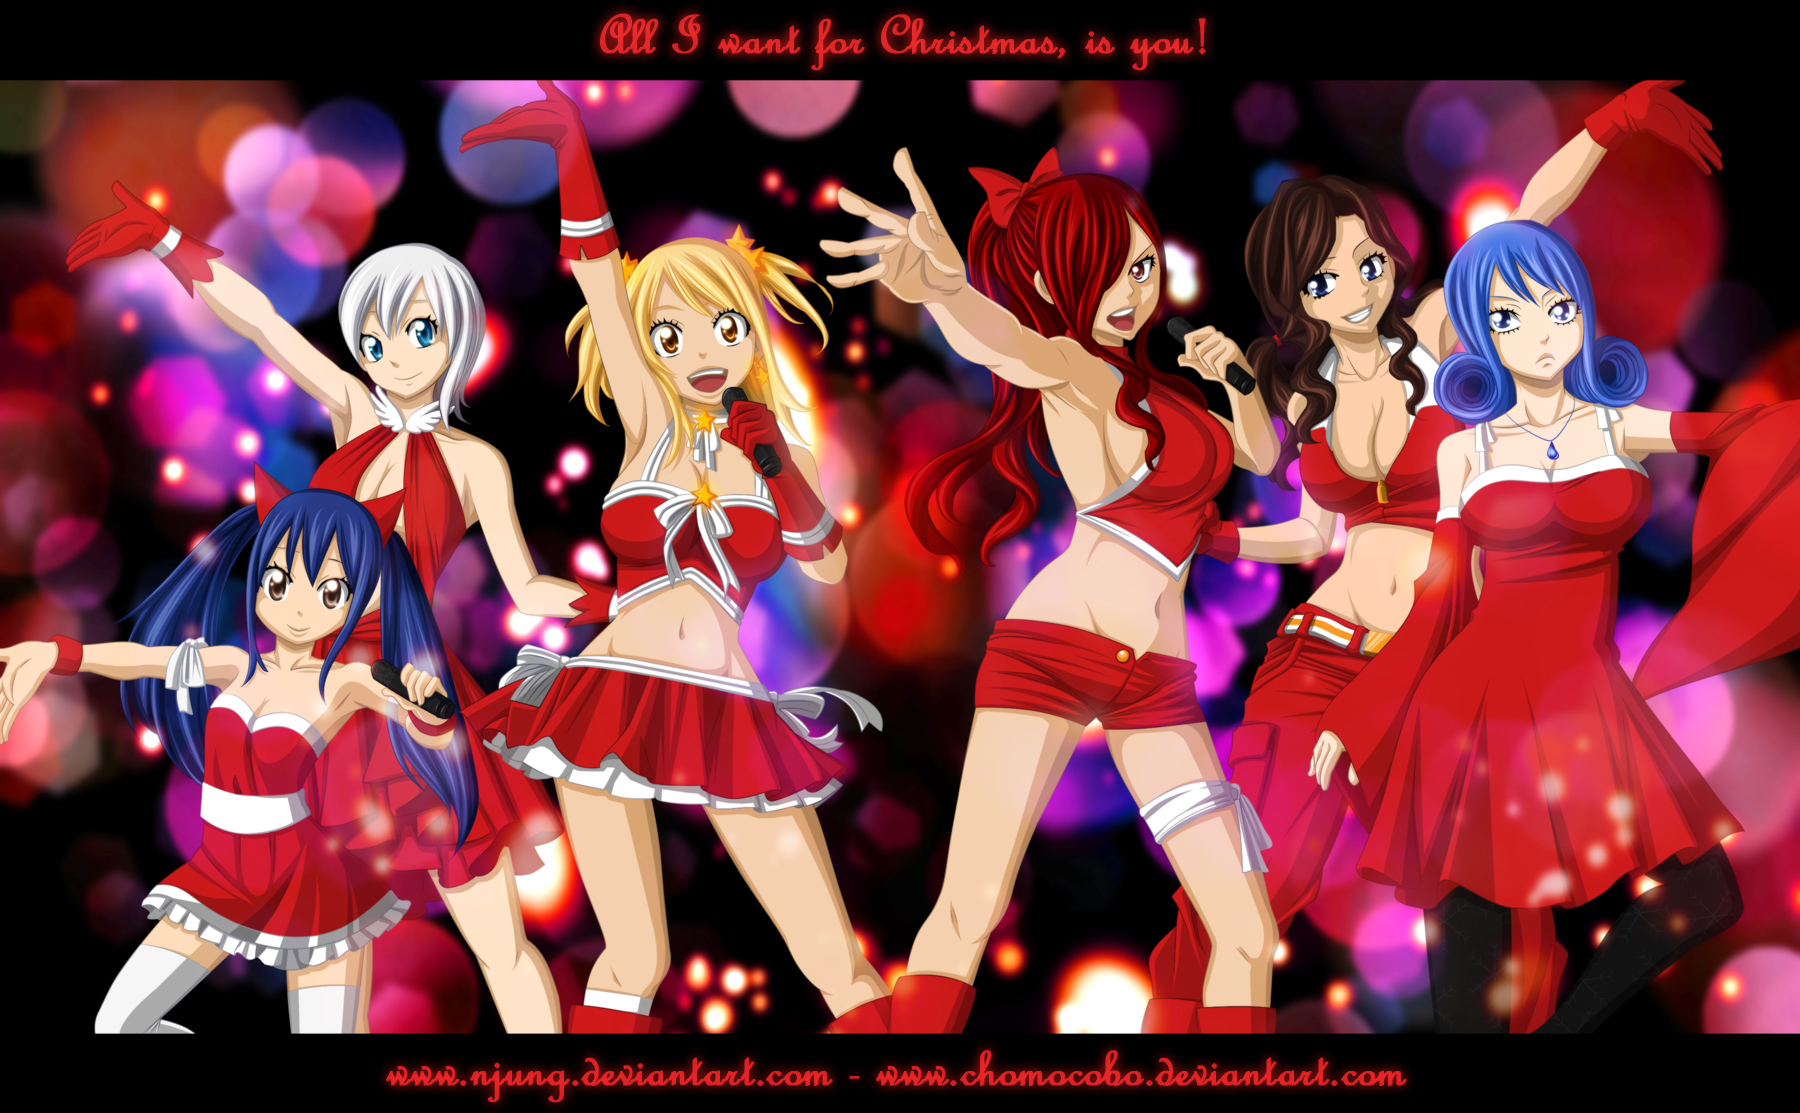 Happy Holidays from the Fairy Tail Girls